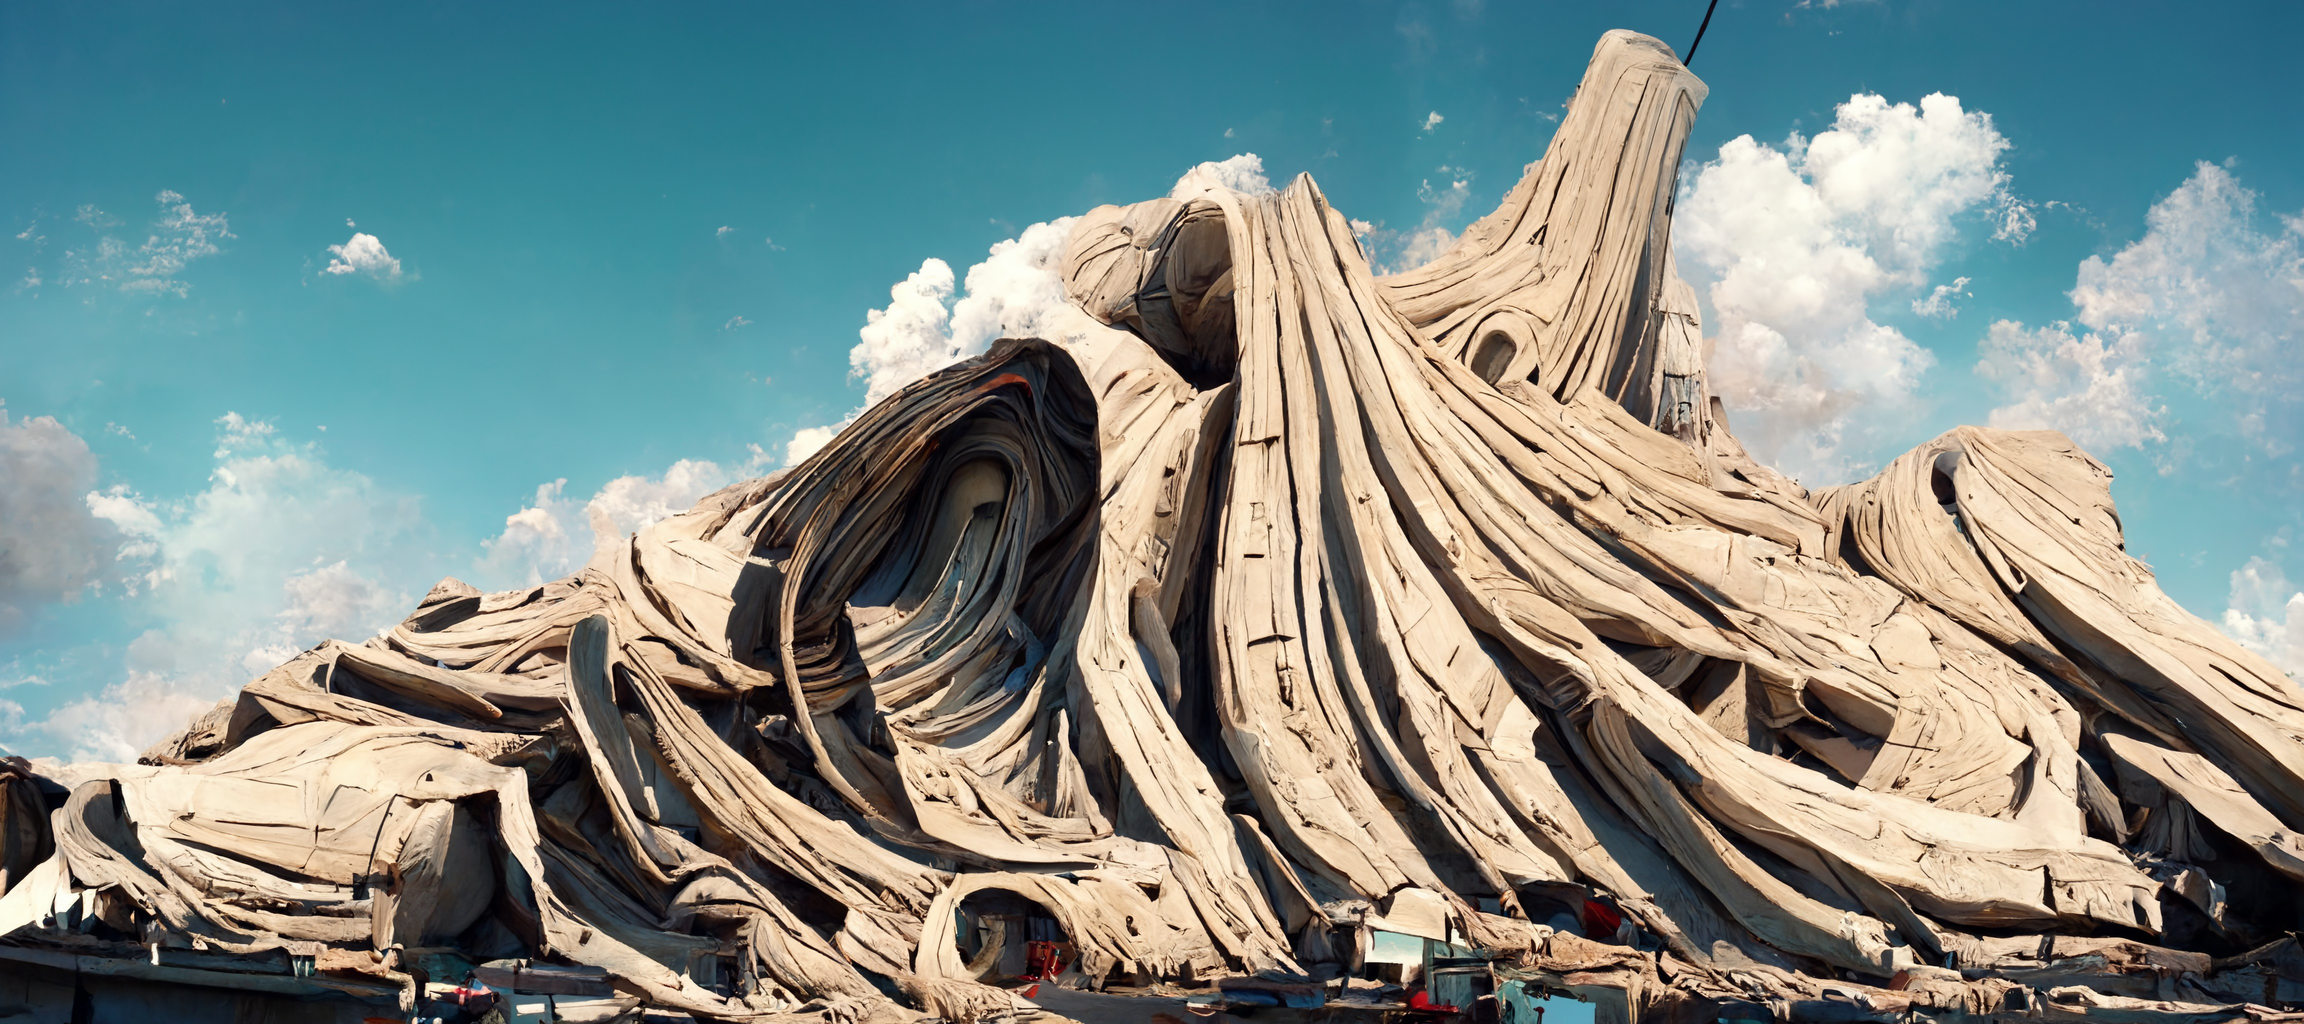 vibe_huge_pile_of_giant_sneakers_towering_over_a_town_photoreal_b91ad260-1fe6-4ff3-b660-3b7a98dd6fff